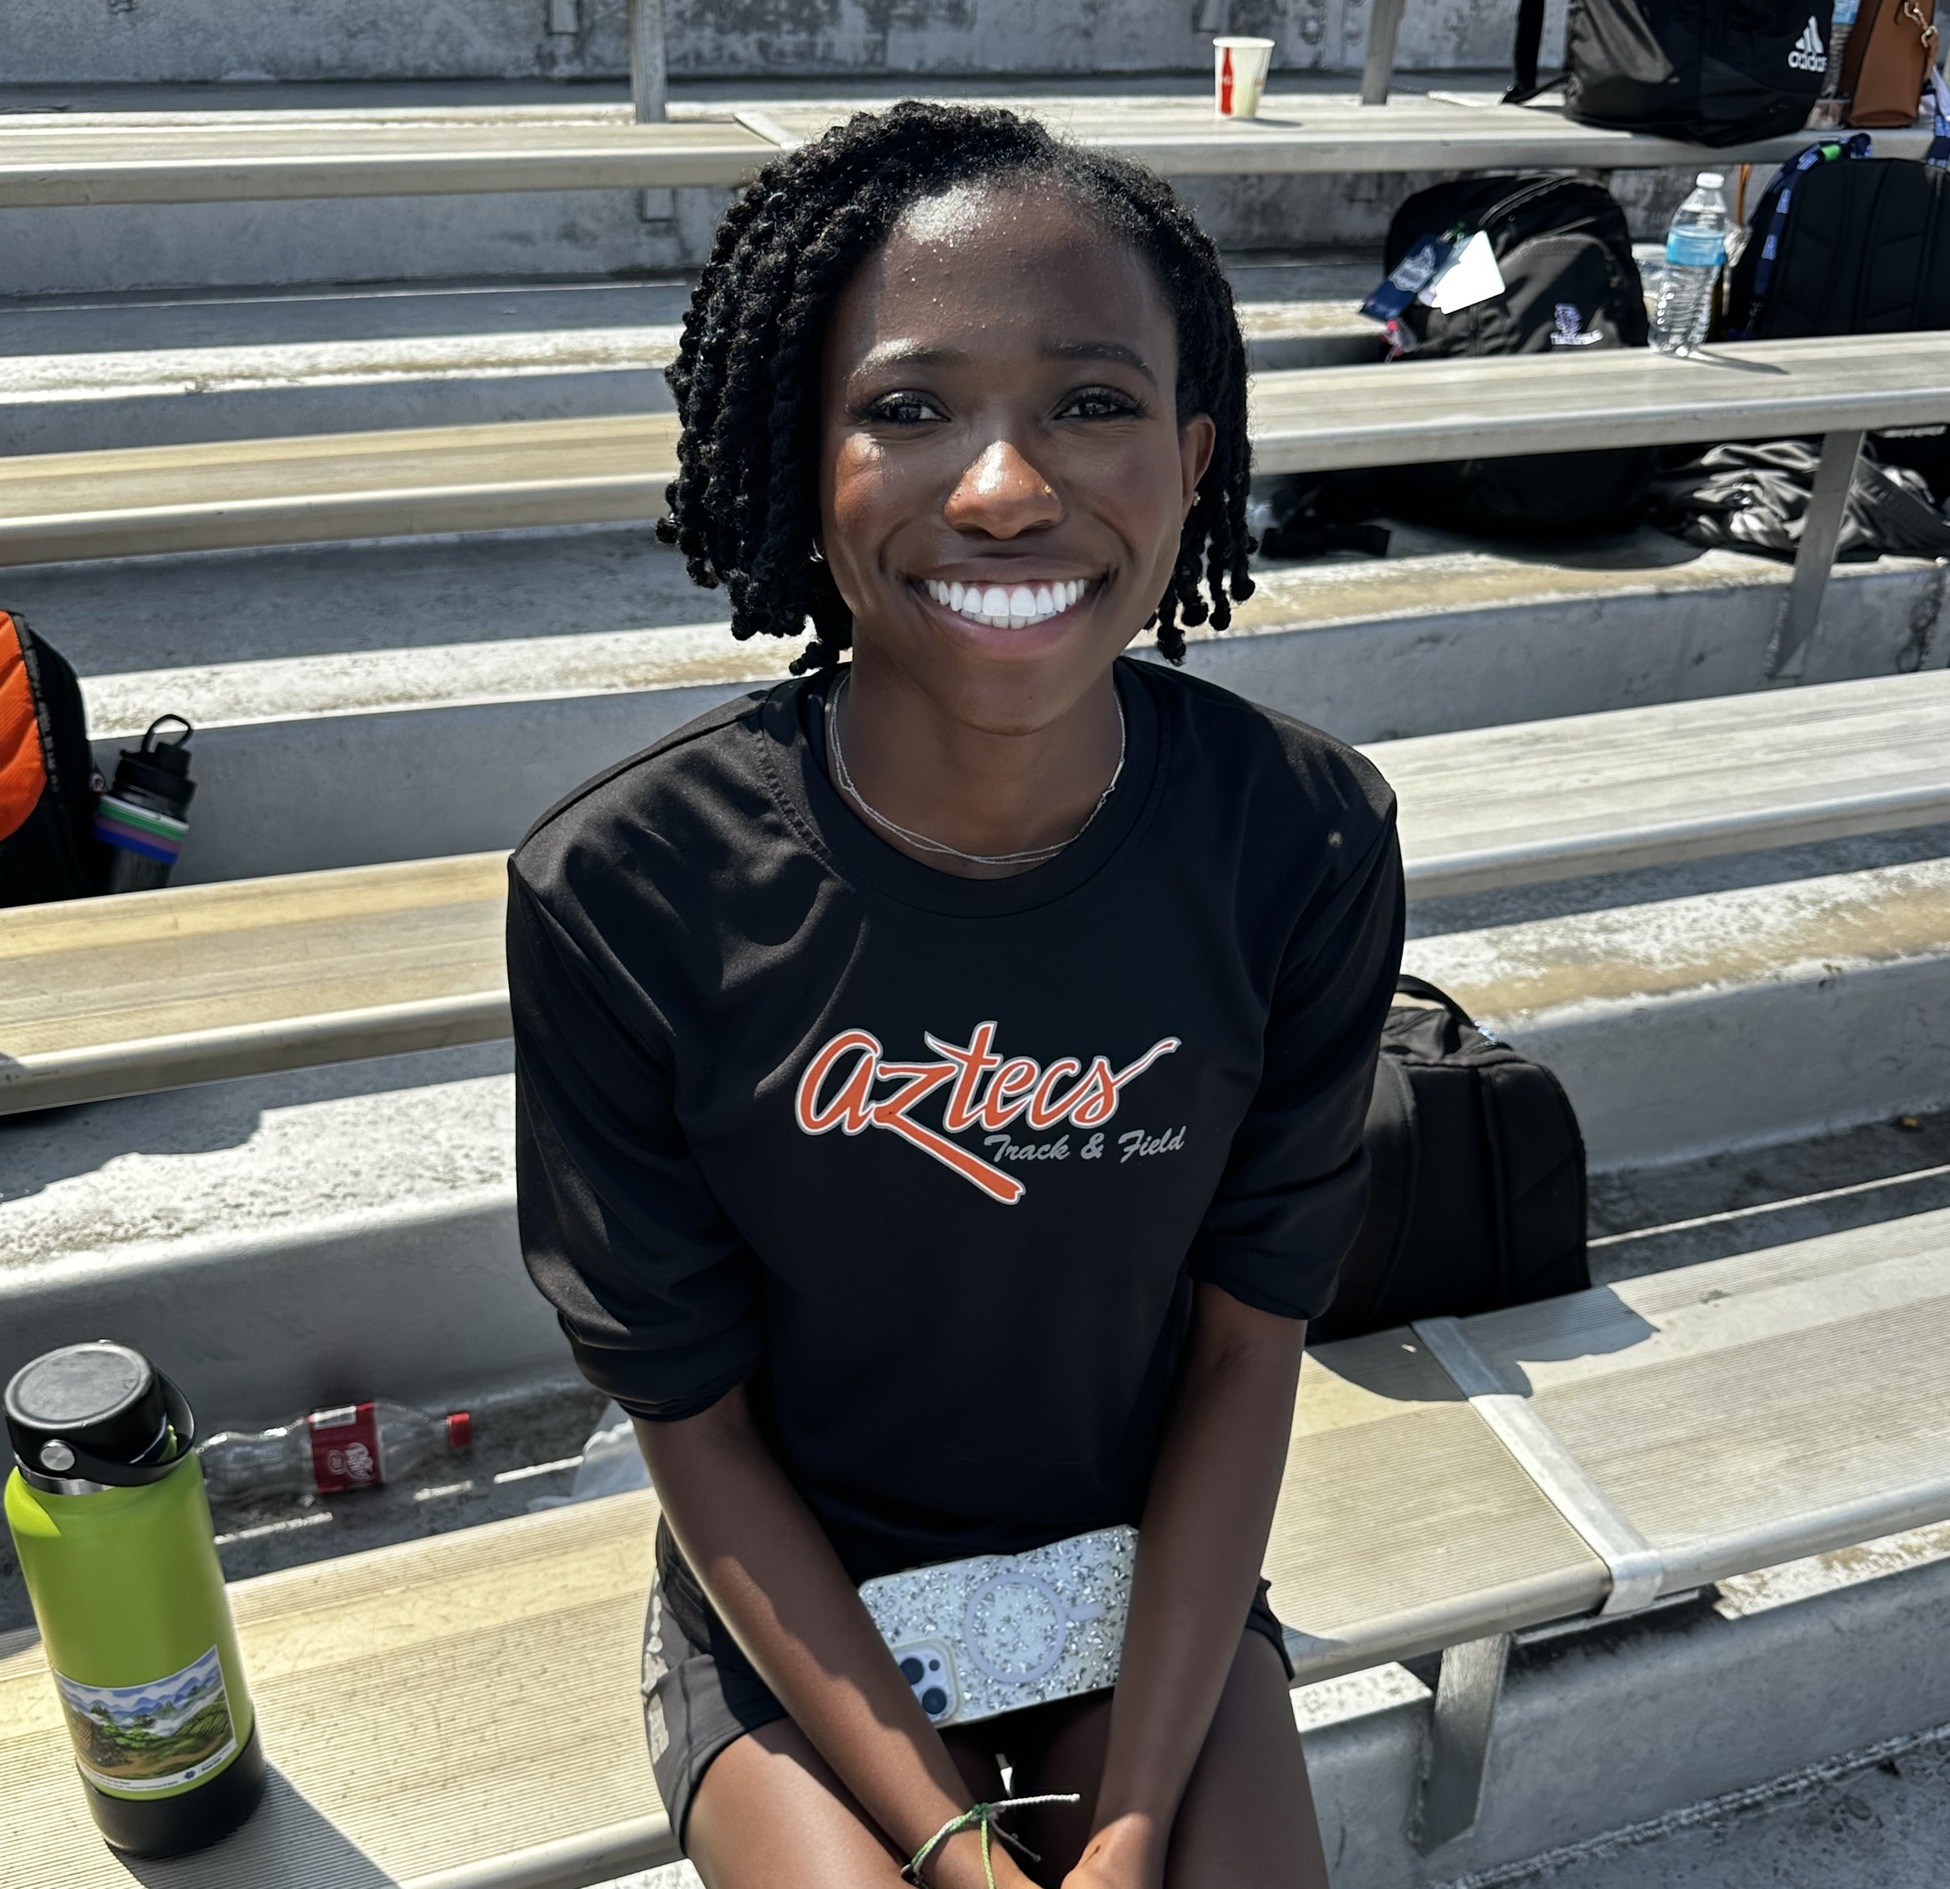 Sophomore Tianna Moseley became a two-time NJCAA All-American after she took eighth place in the Triple Jump with a mark of 11.94 meters (39-feet, 2.25-inches). The Aztecs took 24th place at the NJCAA Division I National Championships with a score of 9.33 points. The Aztecs set five new school records and had six NJCAA All-Americans this Indoor and Outdoor season. Photo courtesy of Chad Harrison